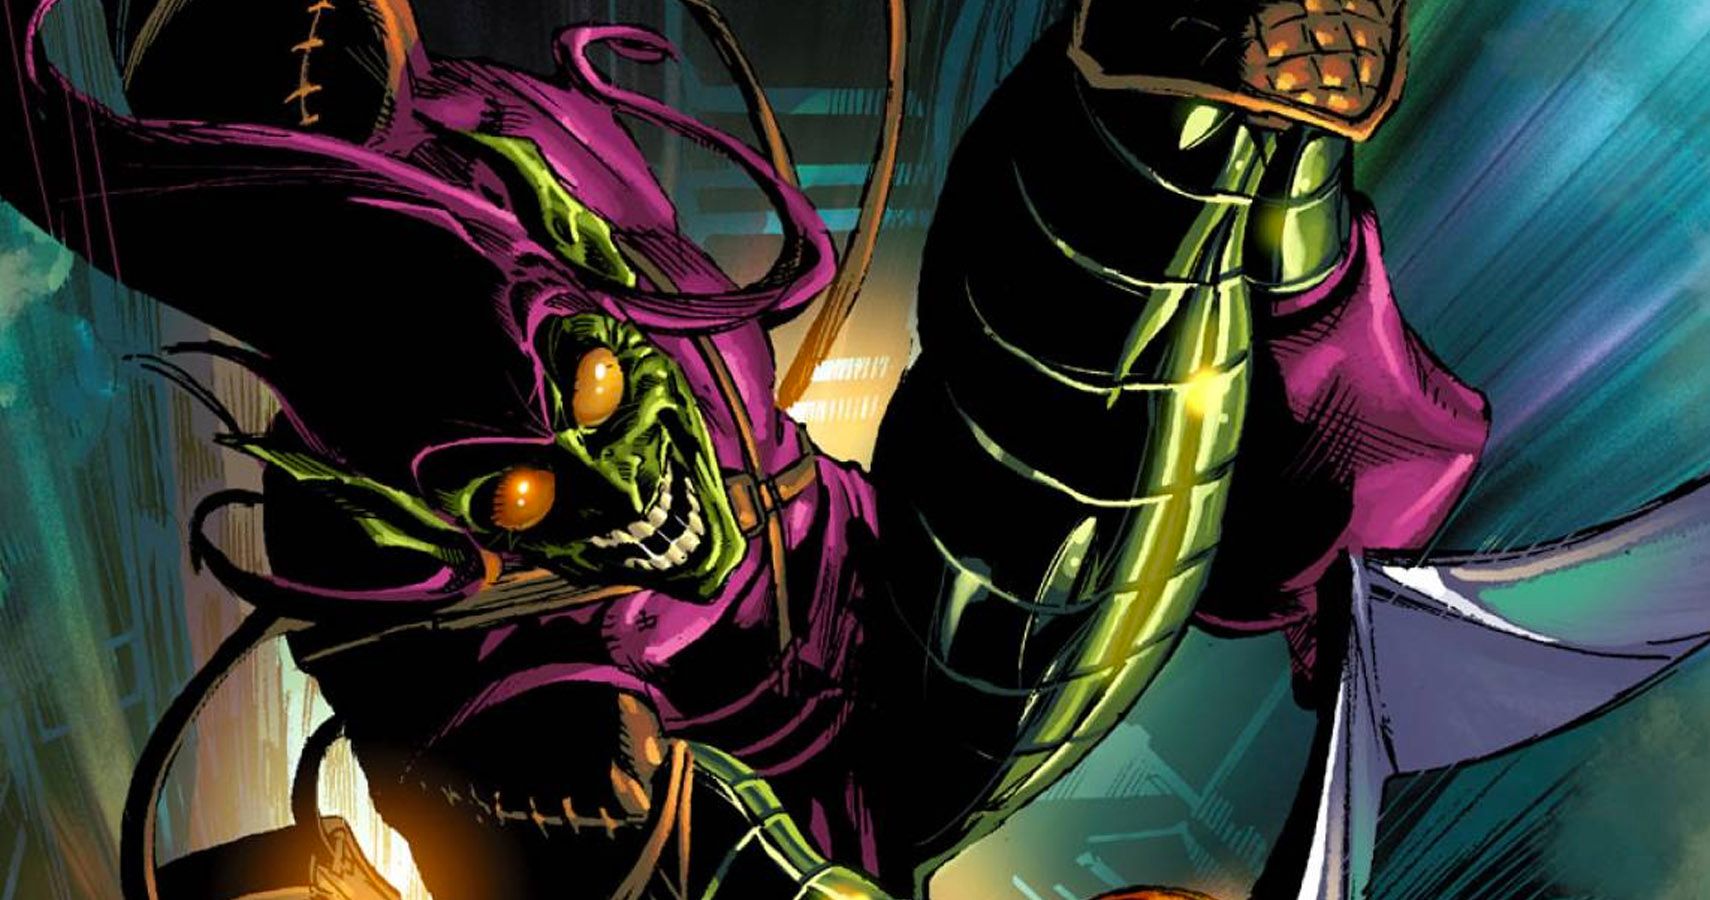 Top 10 Worst Things The Green Goblin Has Ever Done